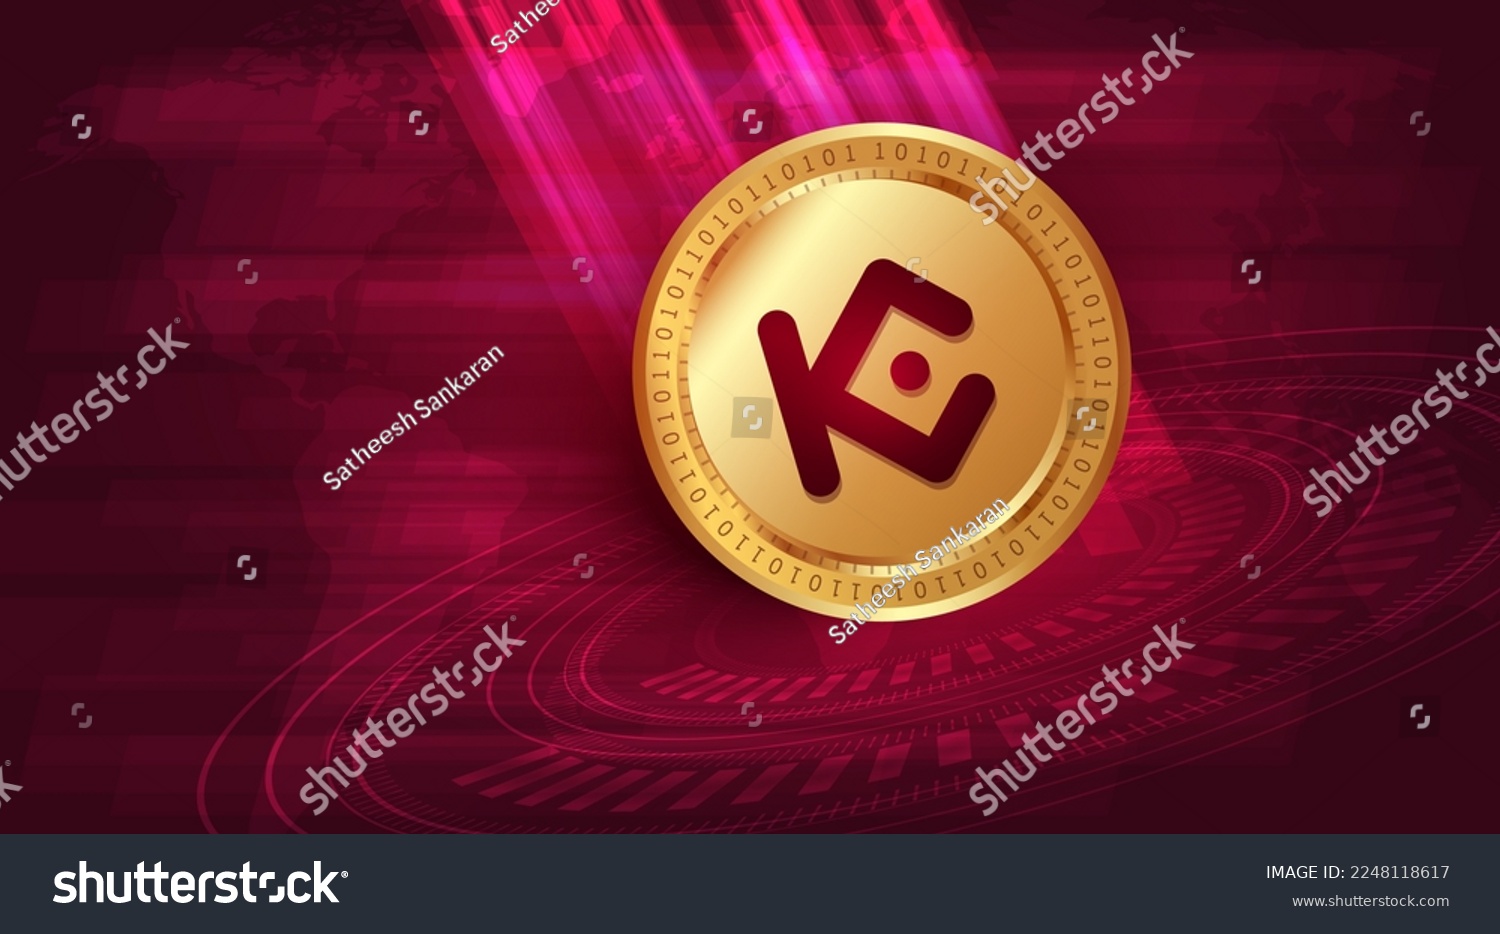 SVG of KuCoin Token (KUCS) crypto currency banner and background svg